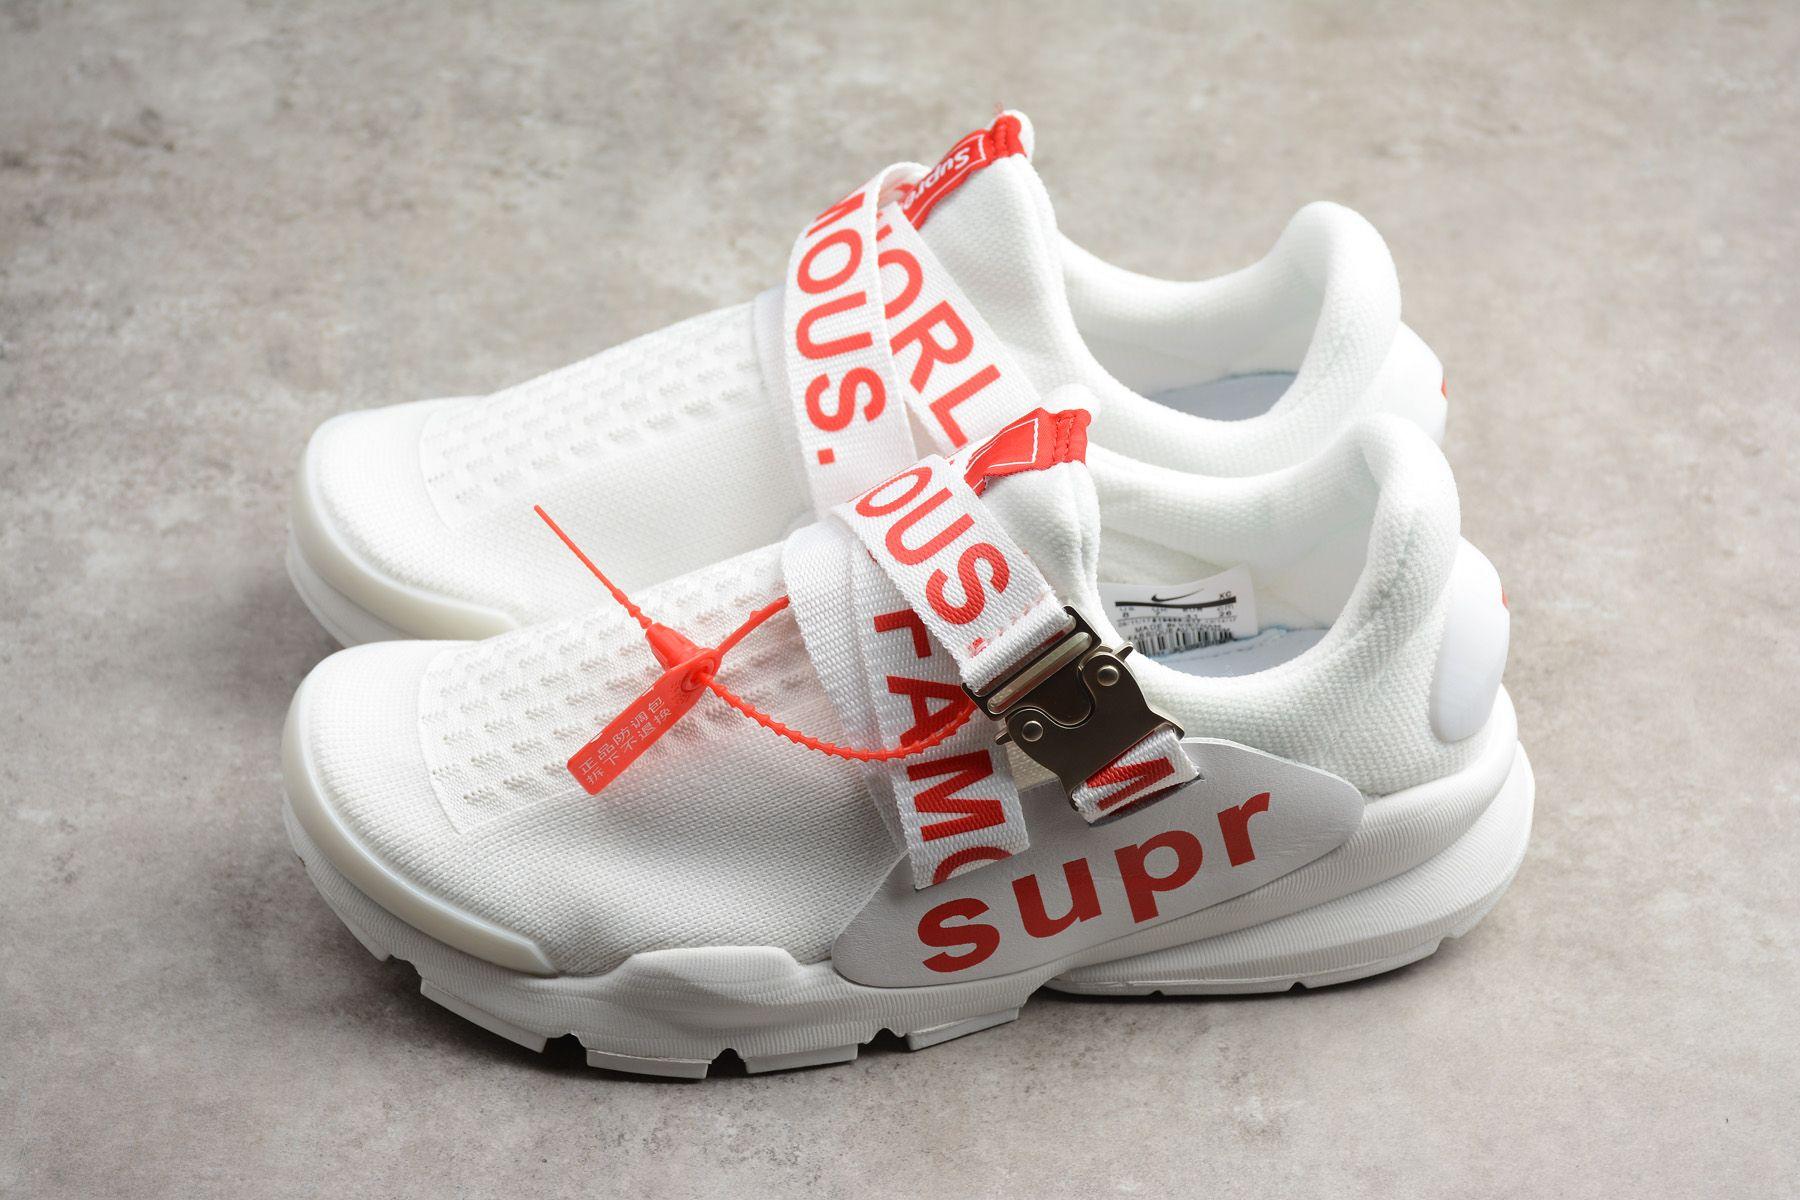 Cool Red X Logo - Supreme x Nike Sock Dart “Cool Red” White Red Lifestyle Shoes 819686 ...